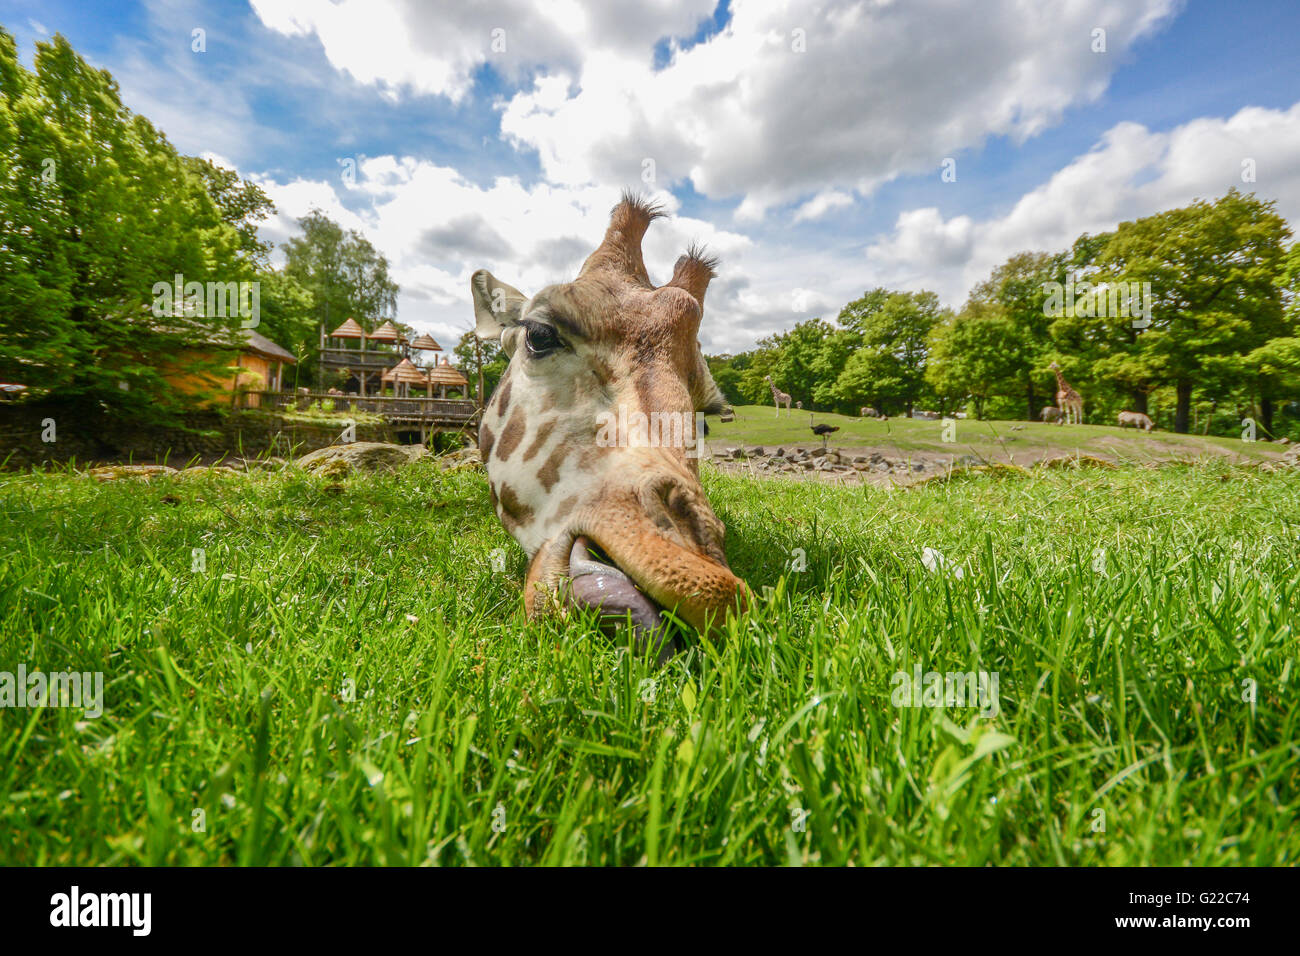 giraffe eating green grass in the sun with clouds on the sky Stock Photo